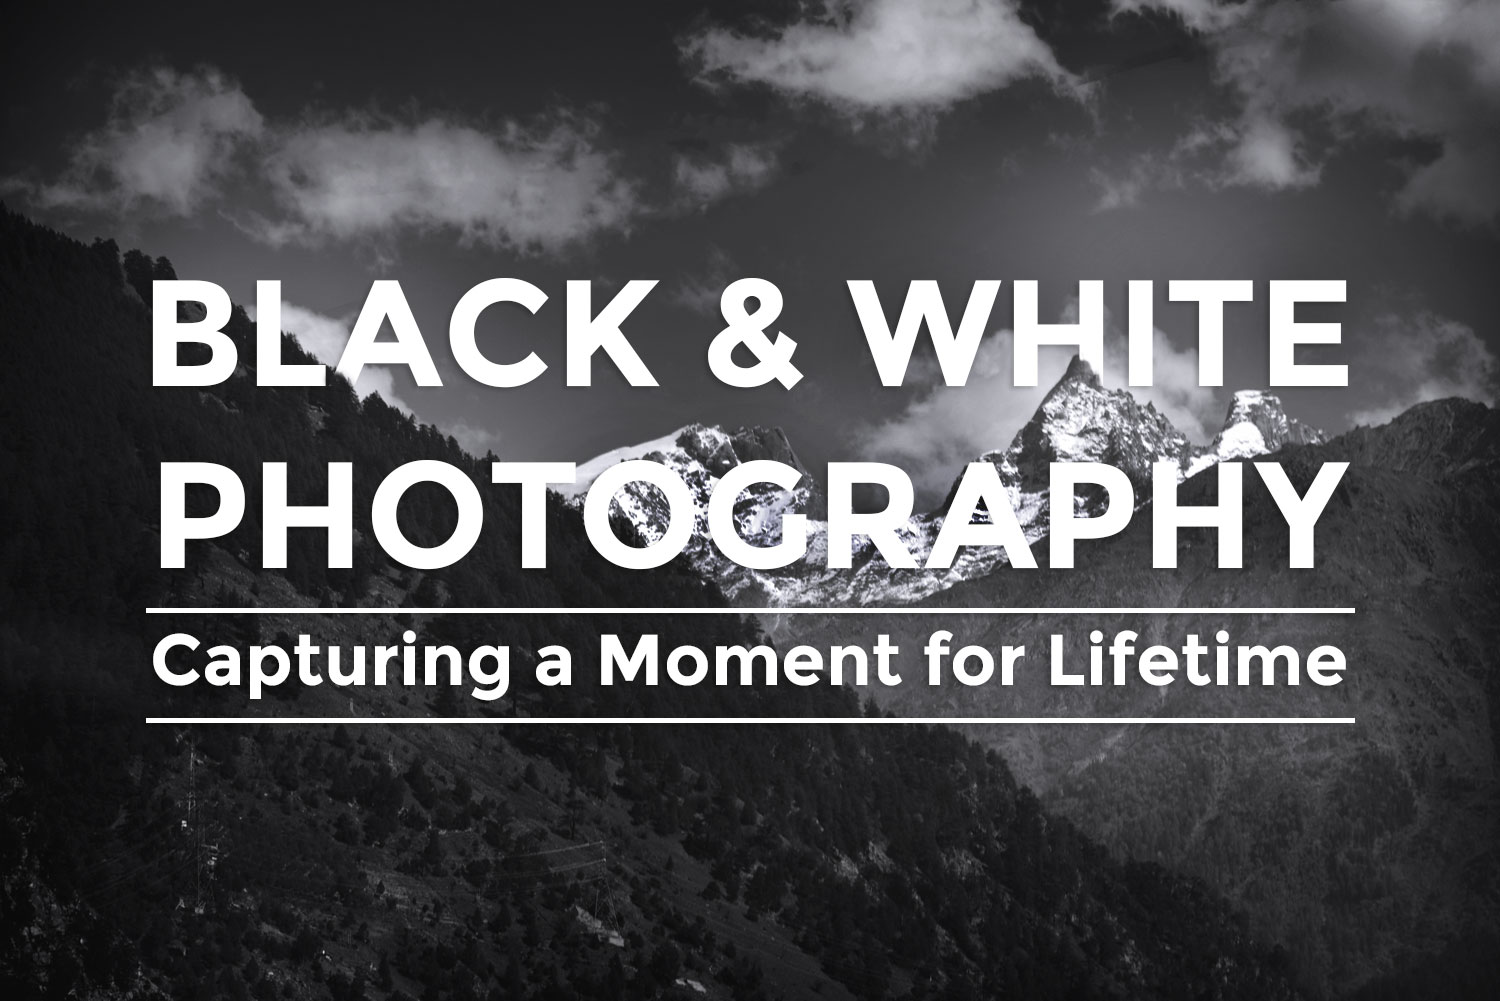 Black And White Photography: Capturing a Moment for Lifetime